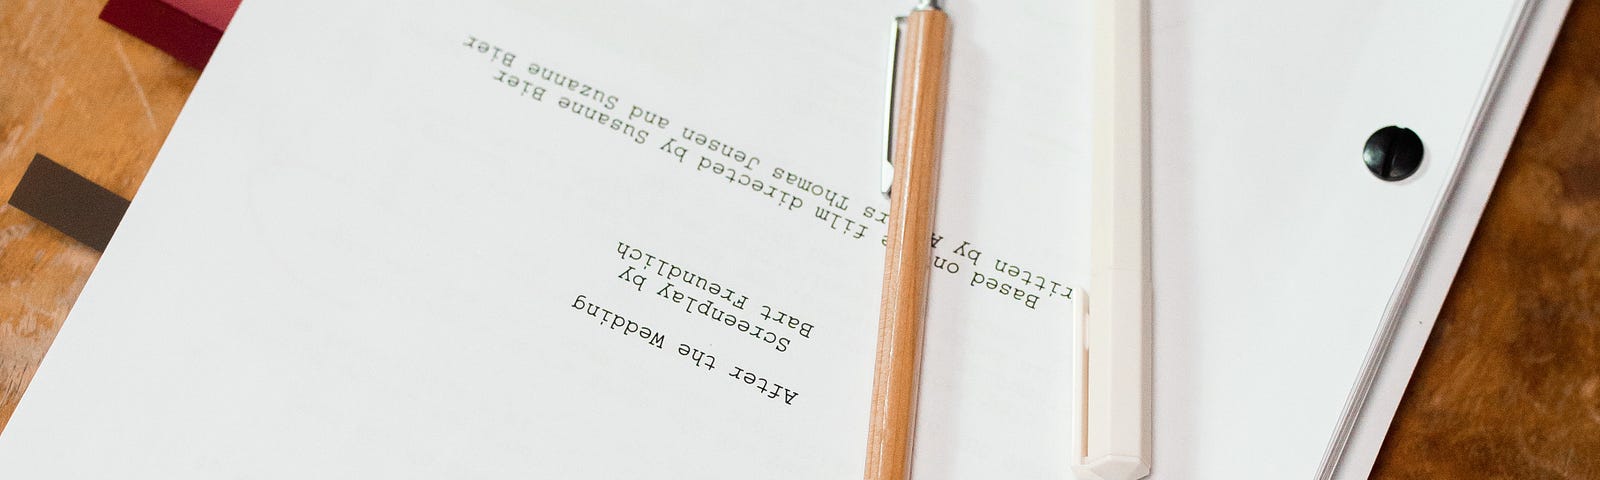 A typewritten manuscript closed on a table with a pencil and pen on top.